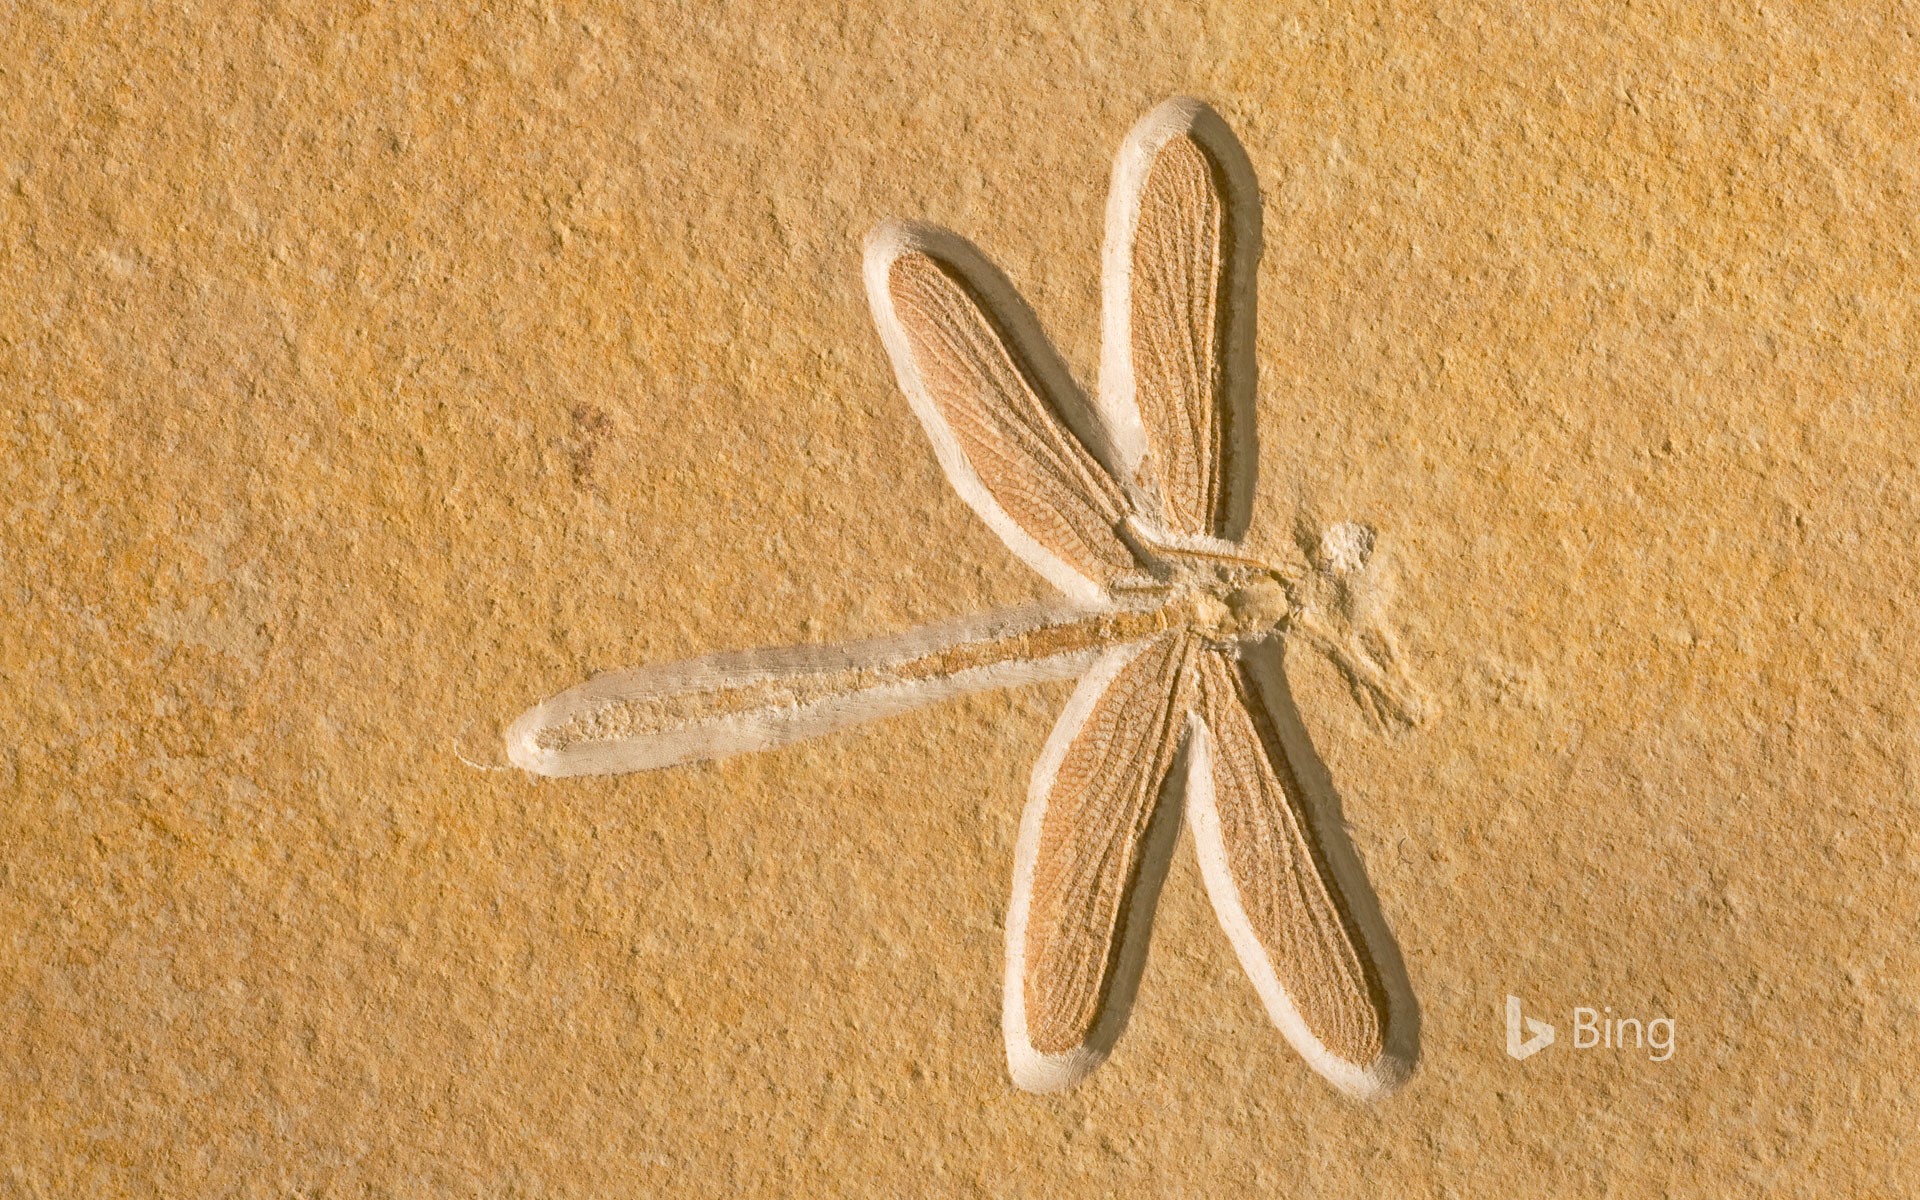 Dragonfly fossil, about 150 million years old, in Solnhofen, Bavaria, Germany